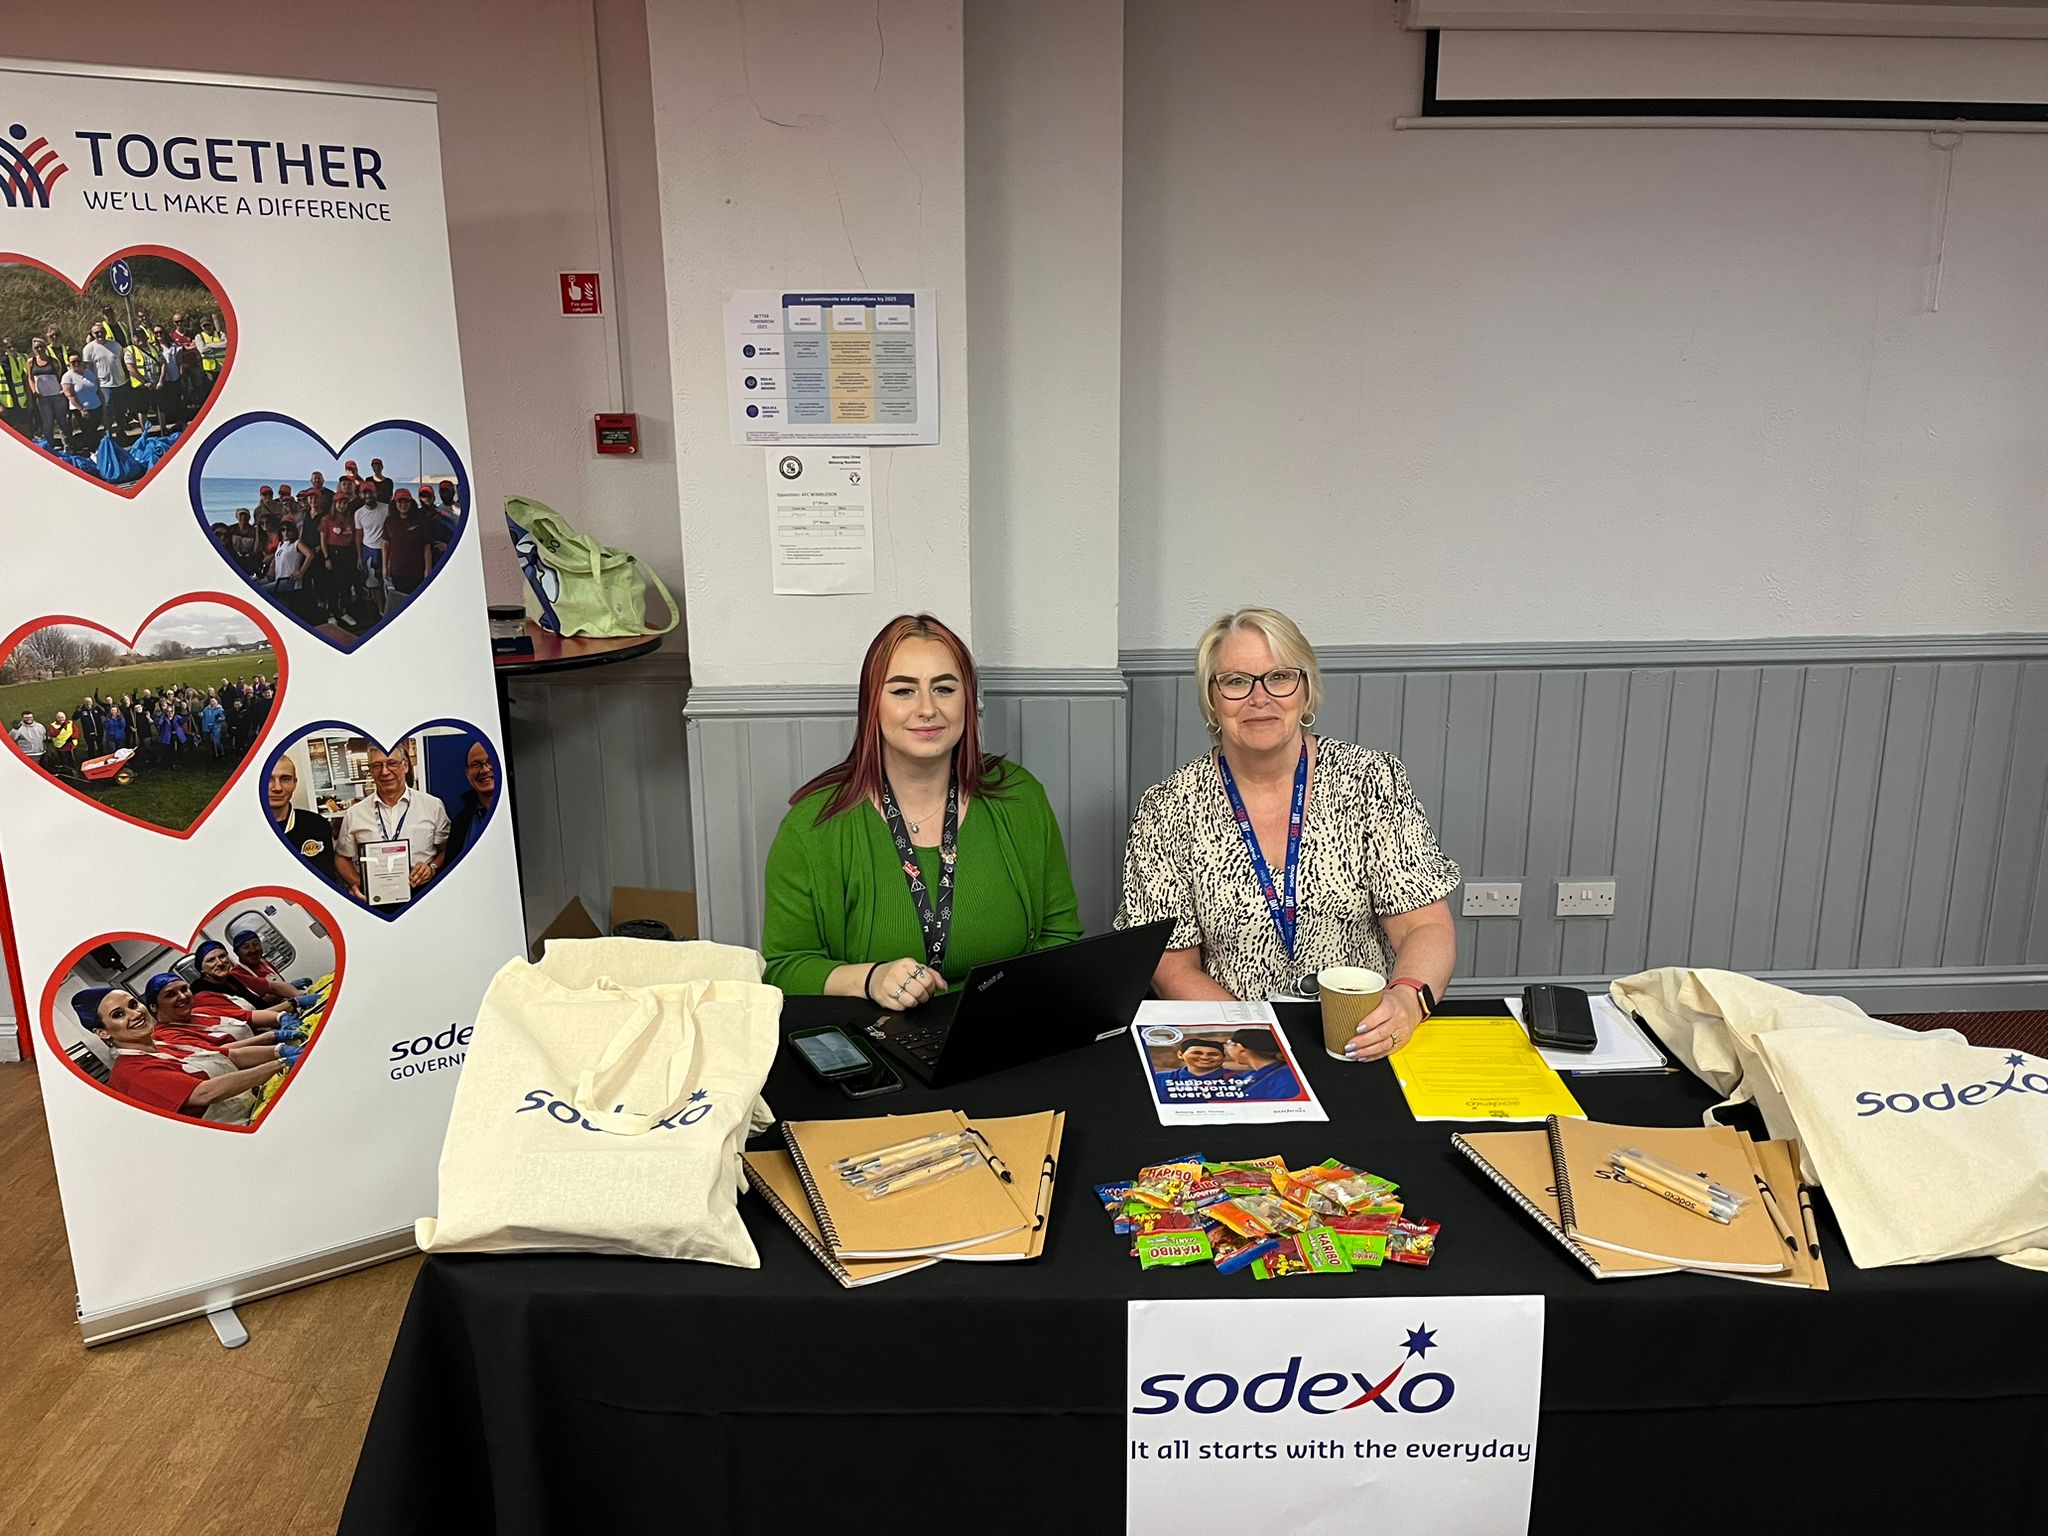 Sodexo at our event in Swindon